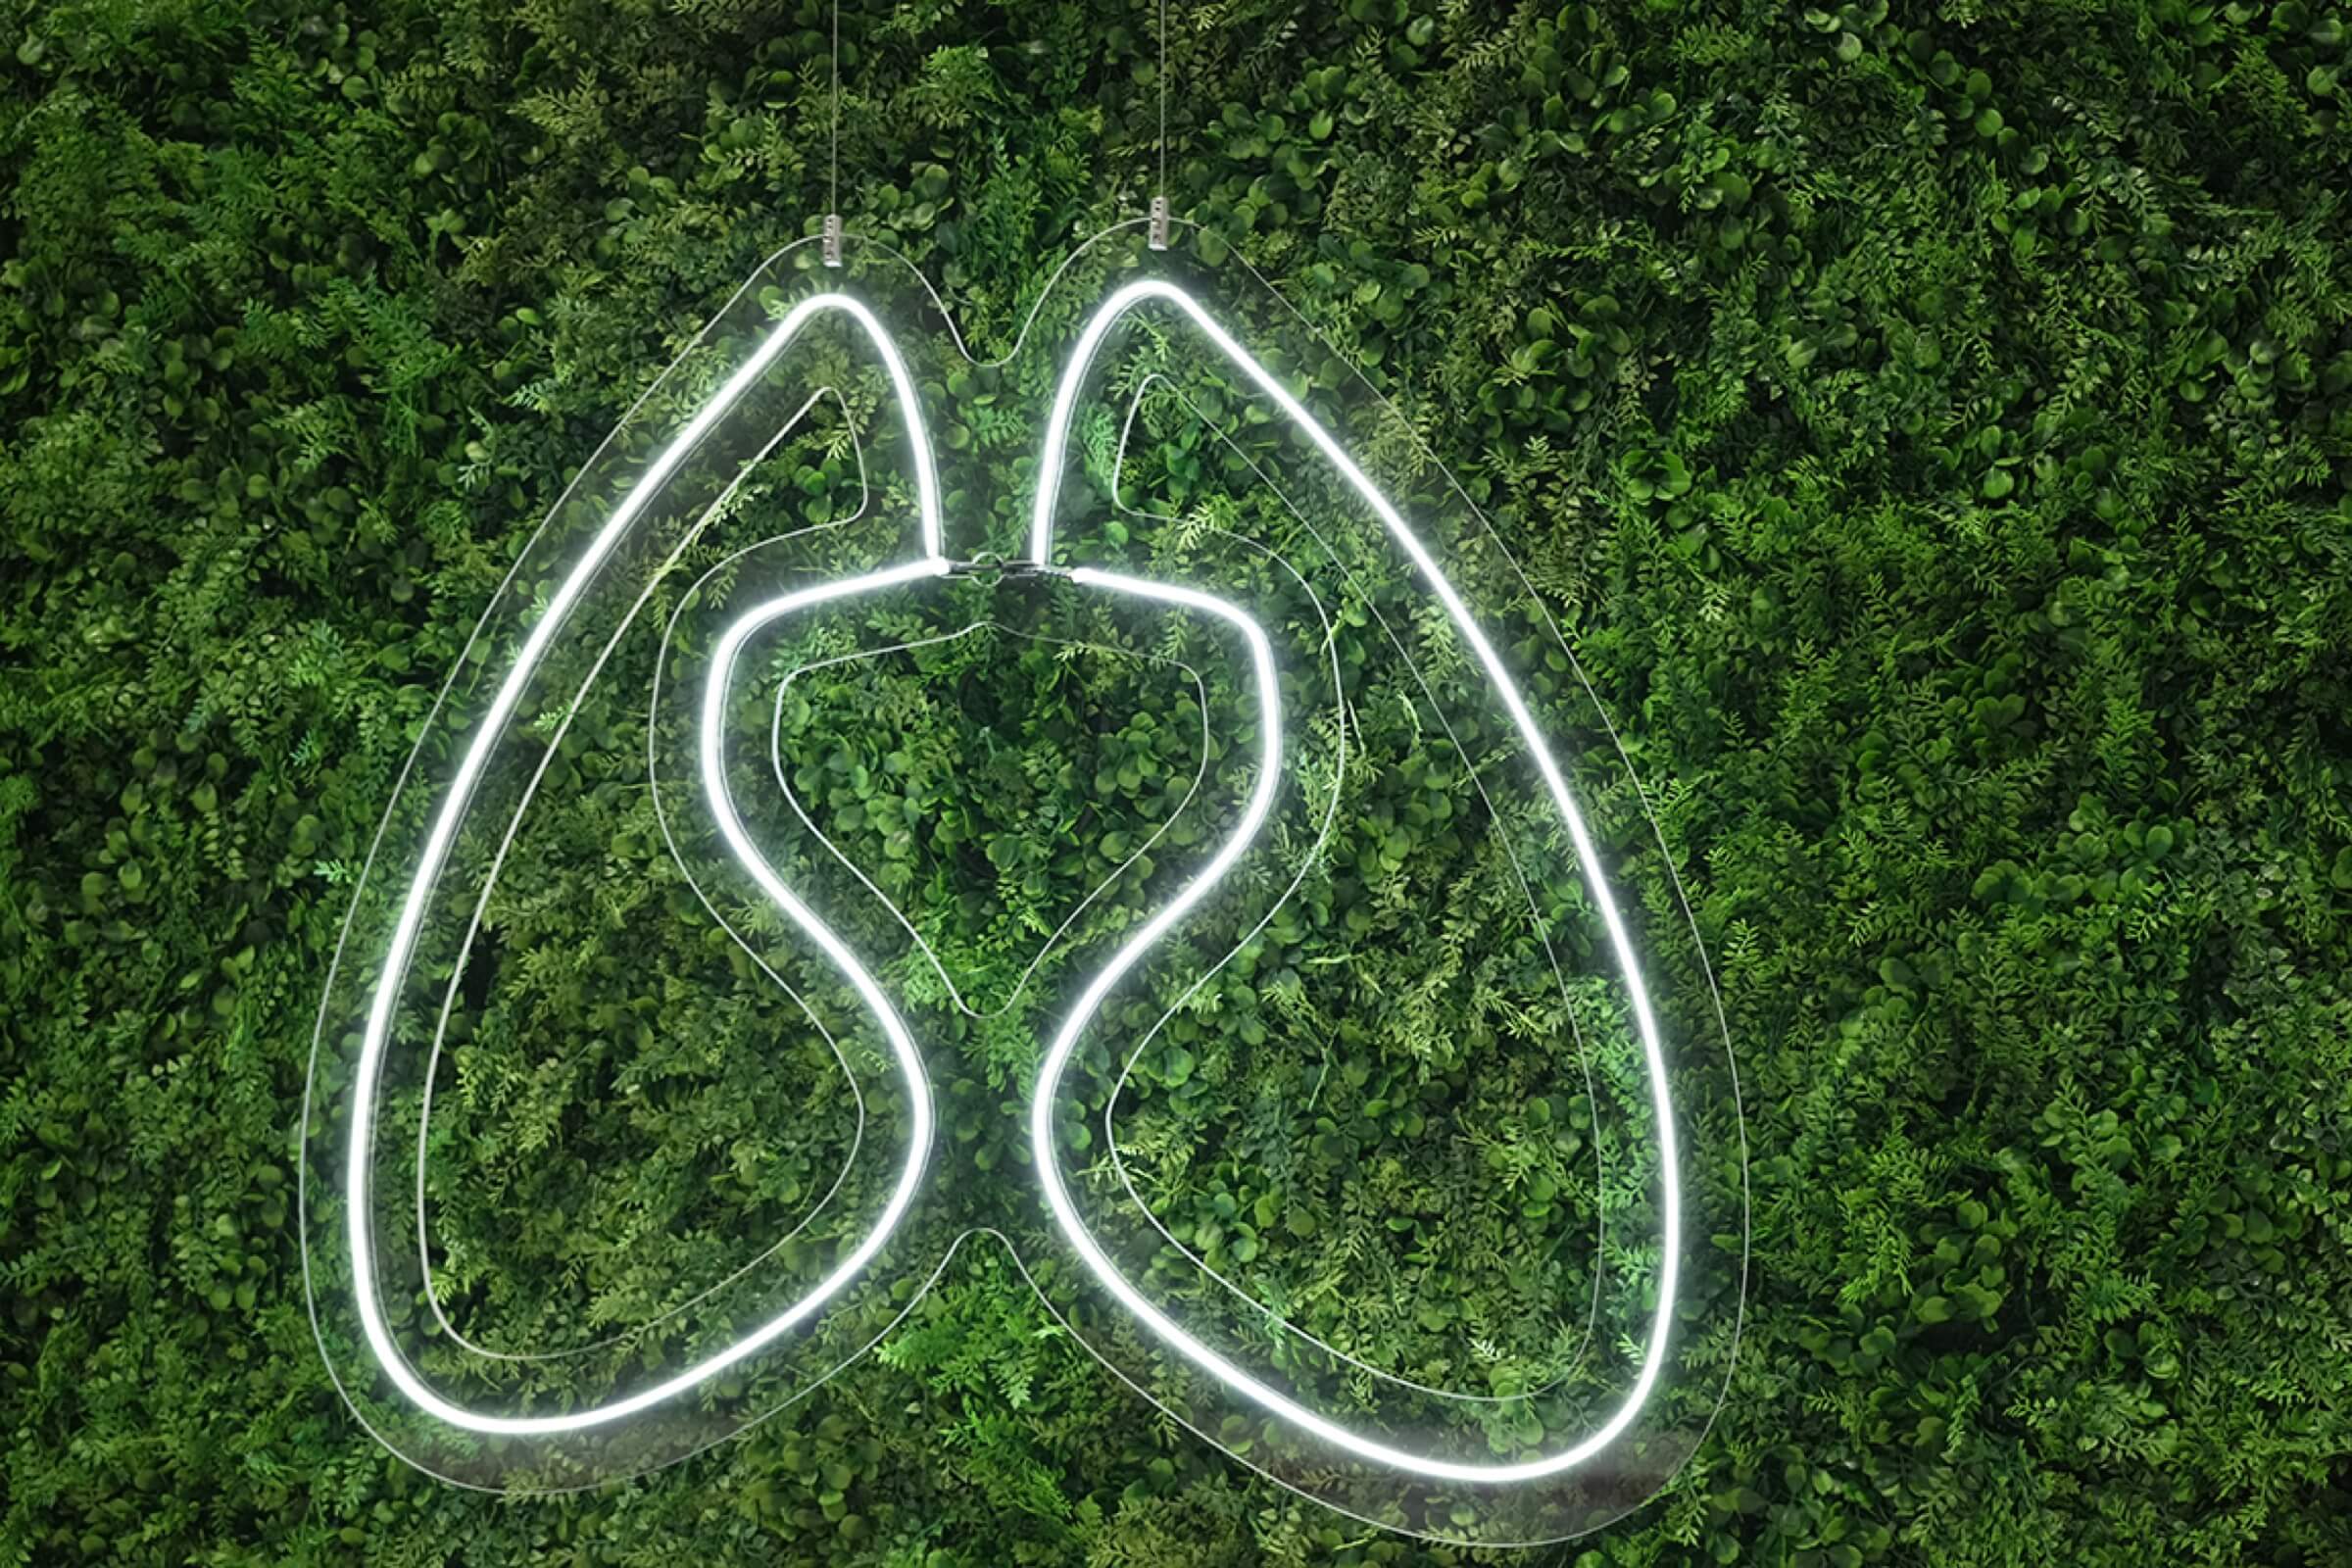 Lung shape icon over green leafy plants